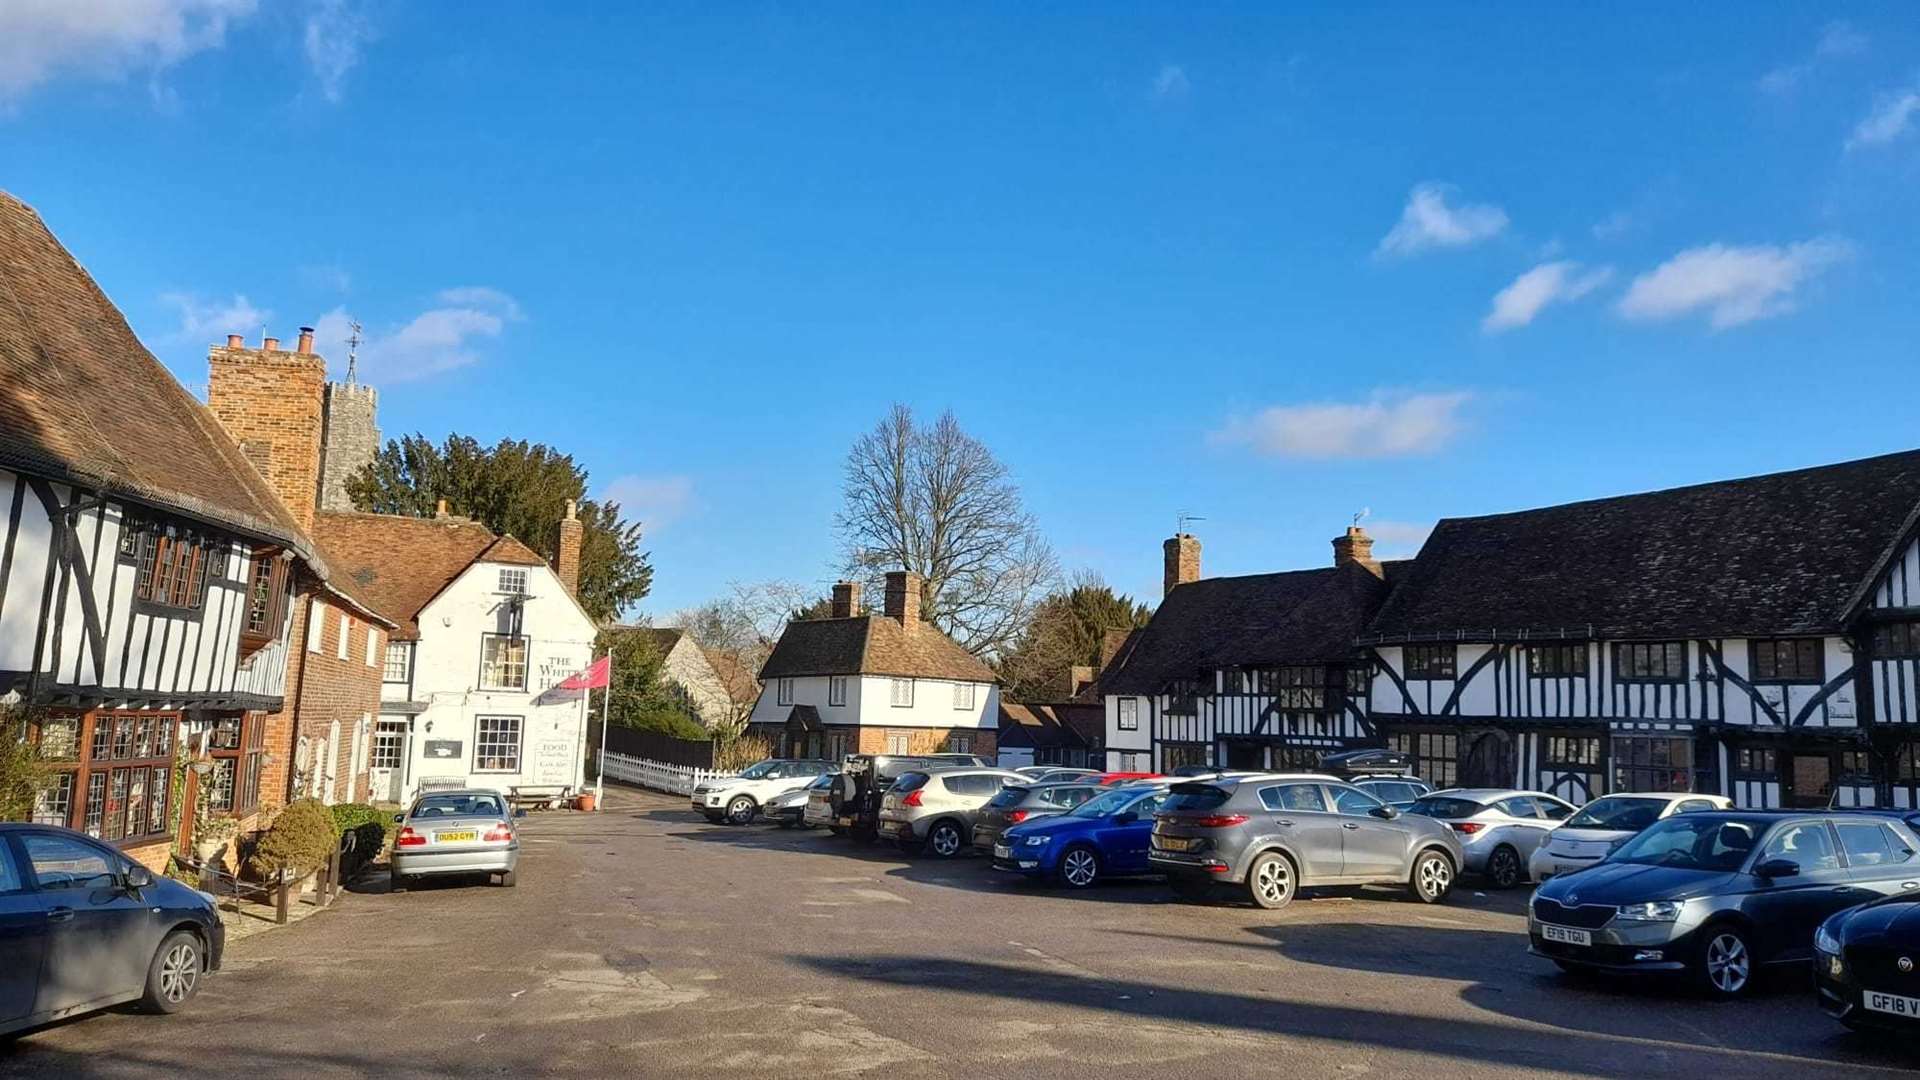 The bar is hoped to be a positive for Chilham's historic village square